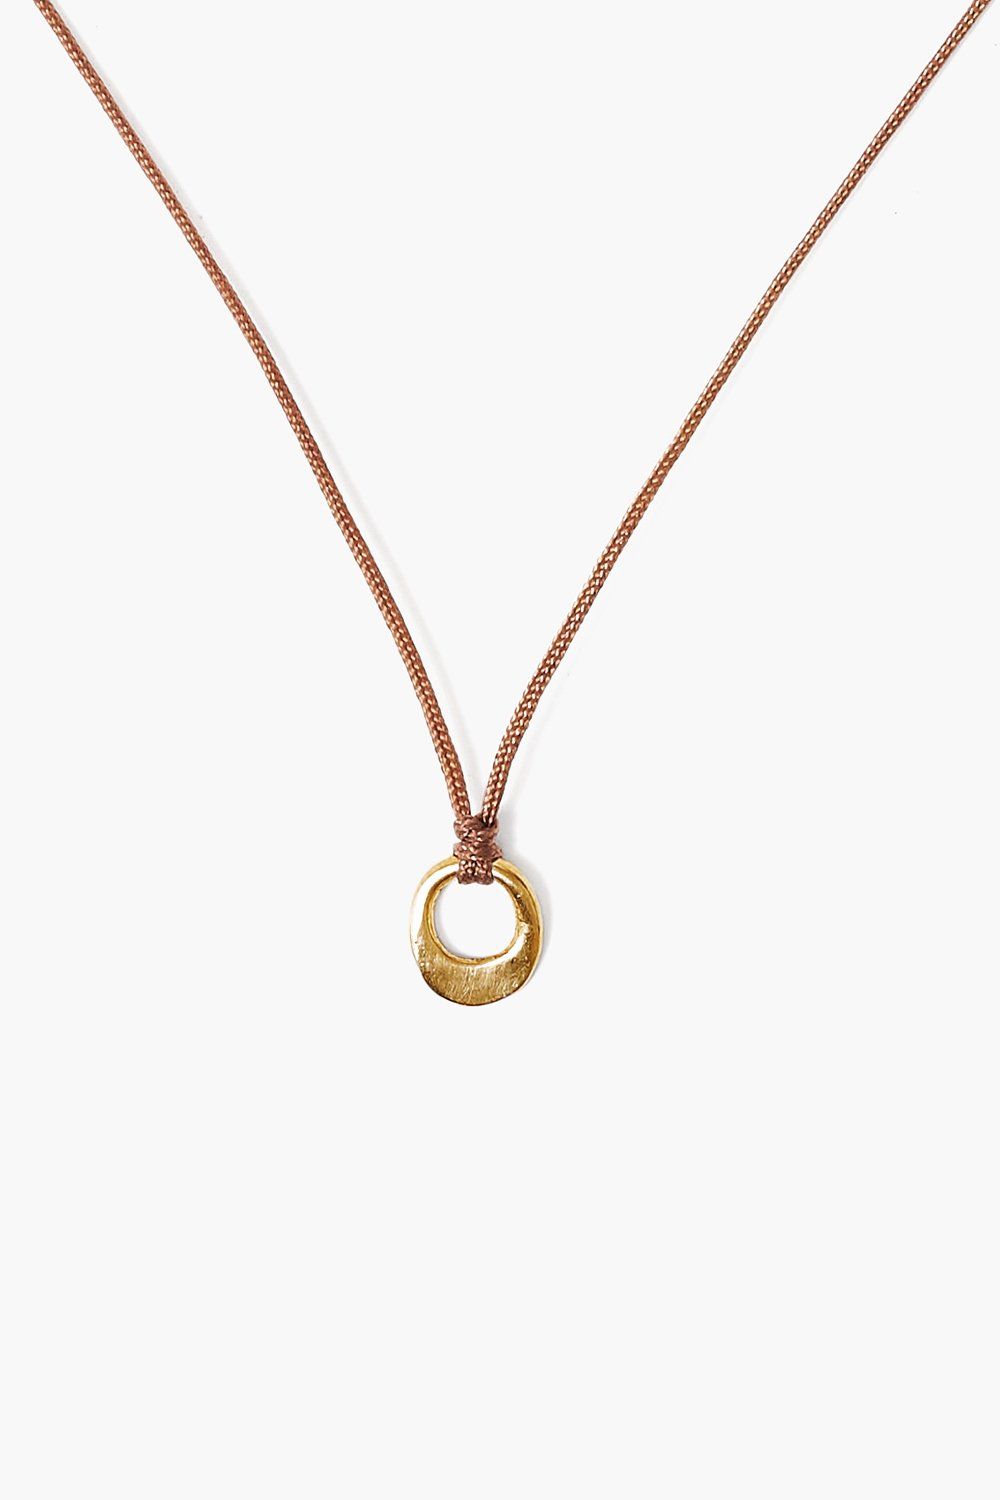 GOLD SOLITAIRE INFINITY LOOP NECKLACE